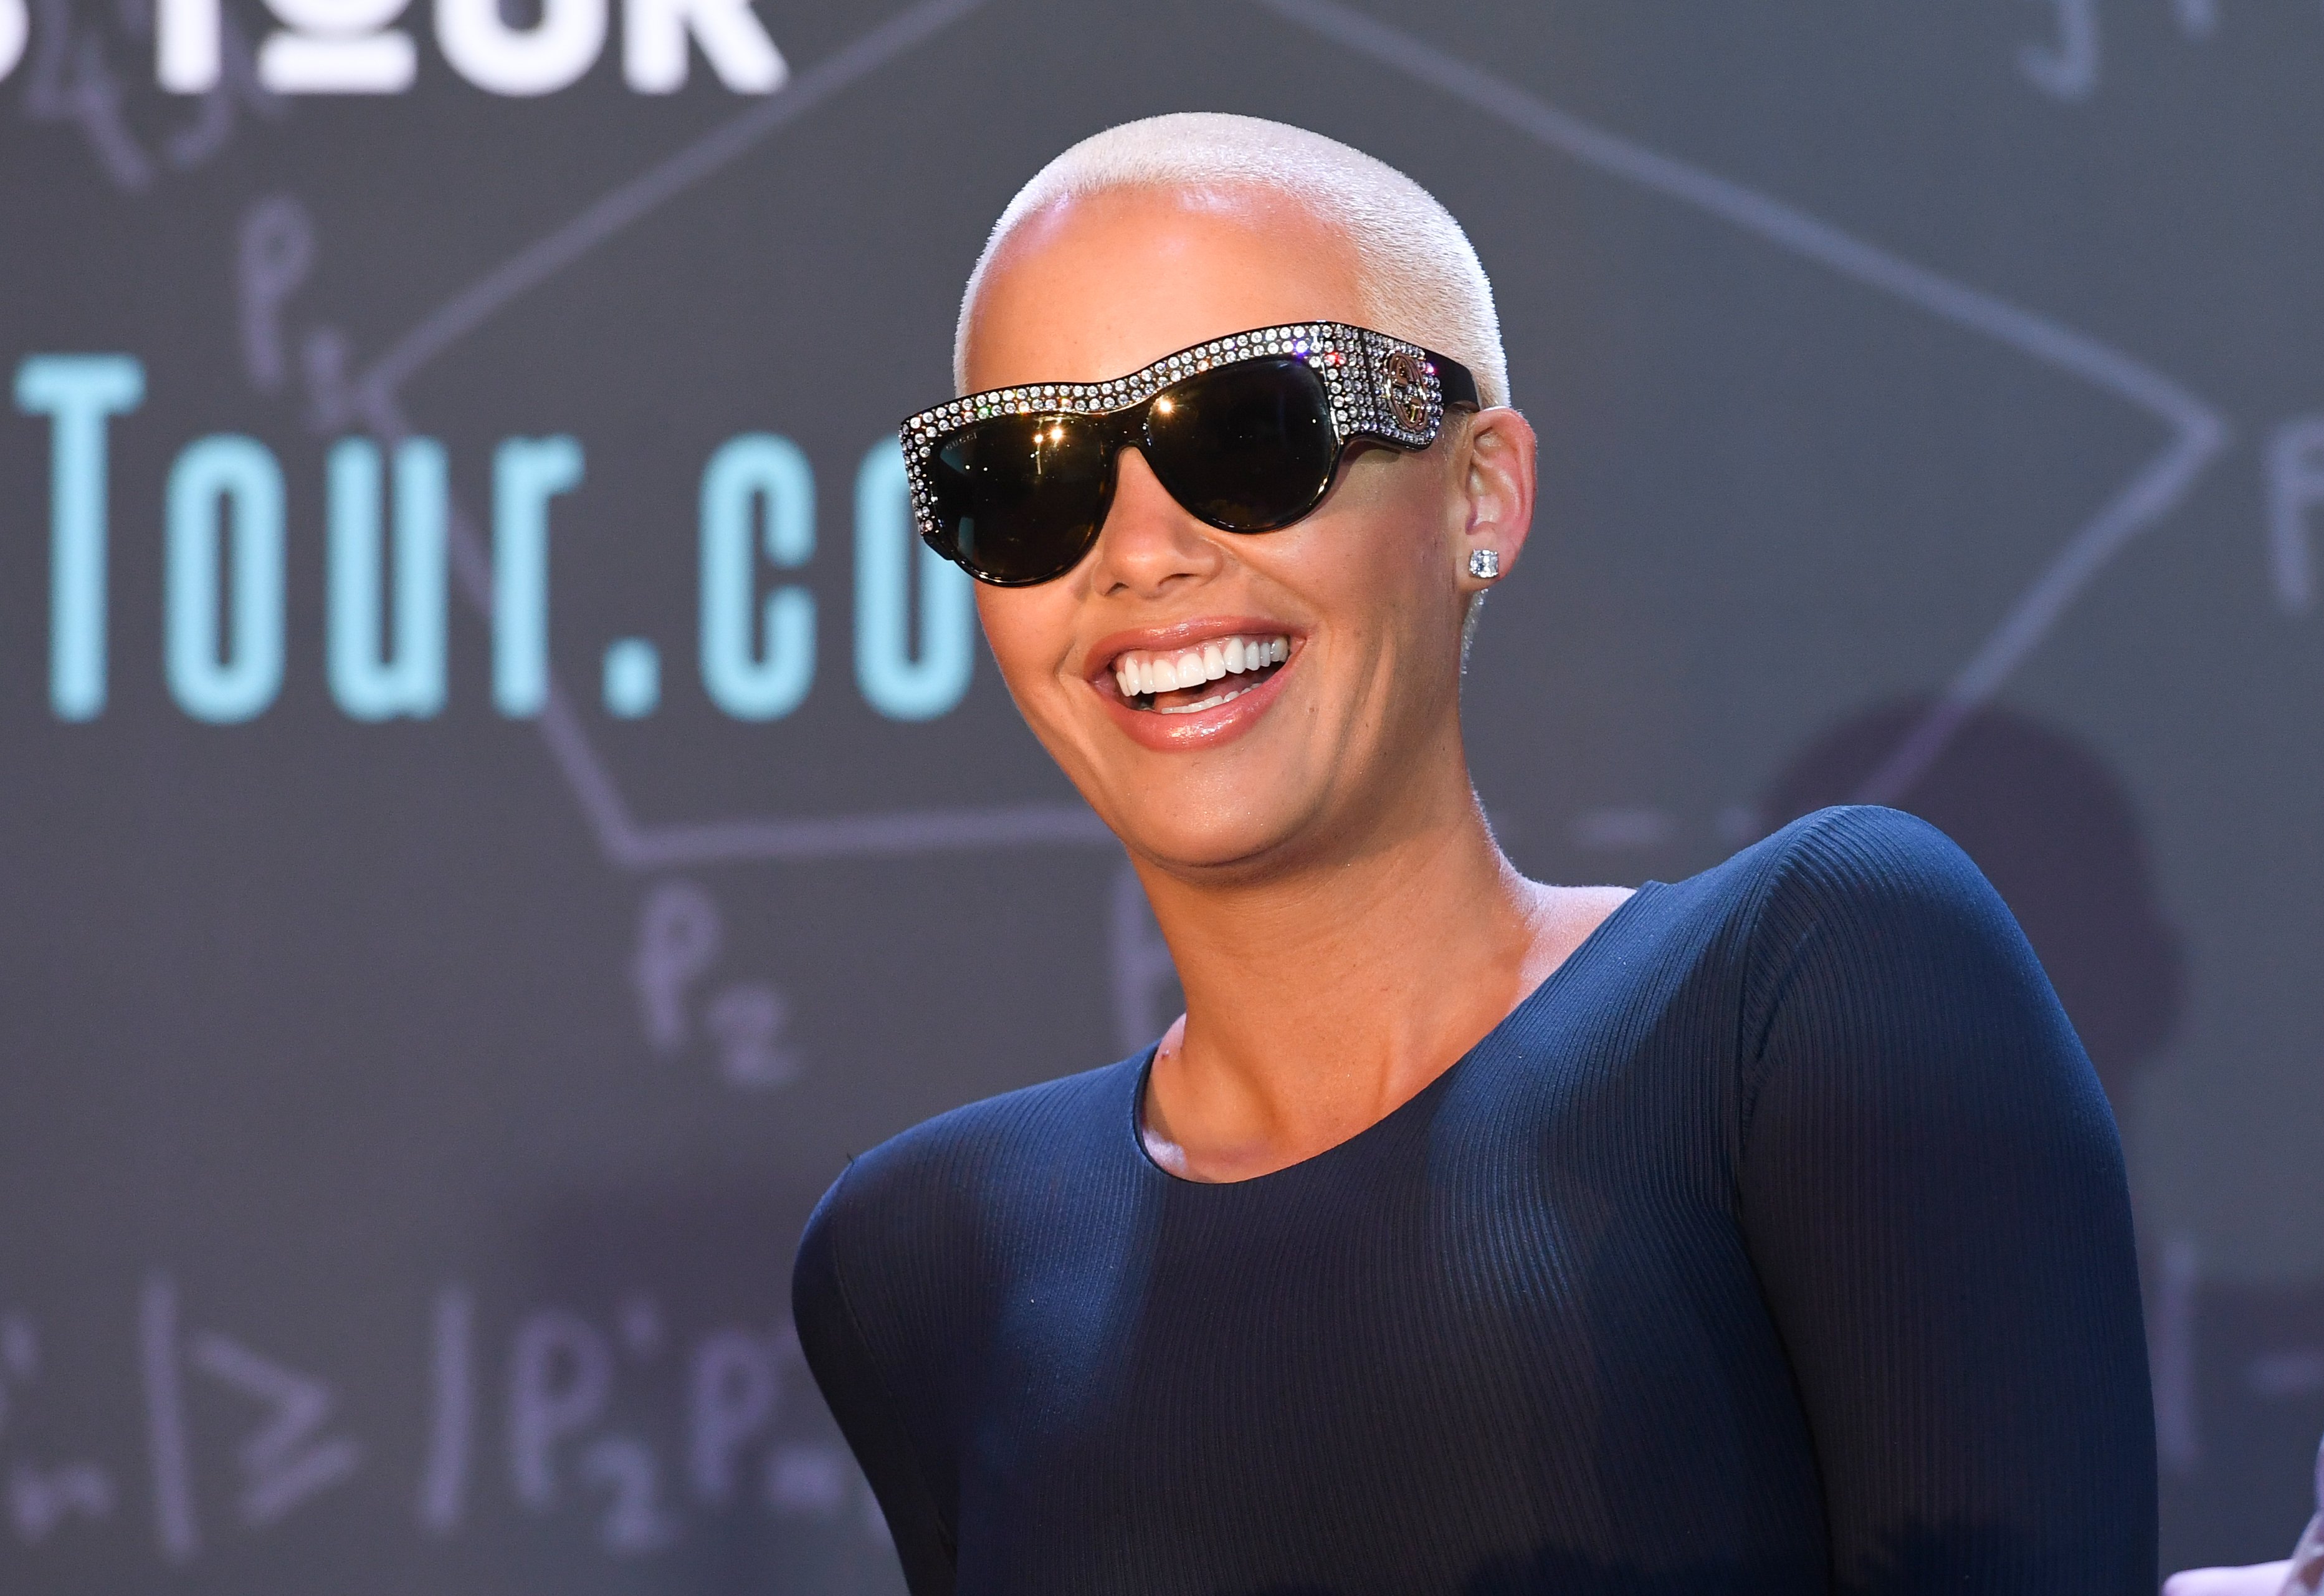  Amber Rose during an appearance at Clark Atlanta University on April 20, 2017 in Atlanta, Georgia. | Photo: Getty Images